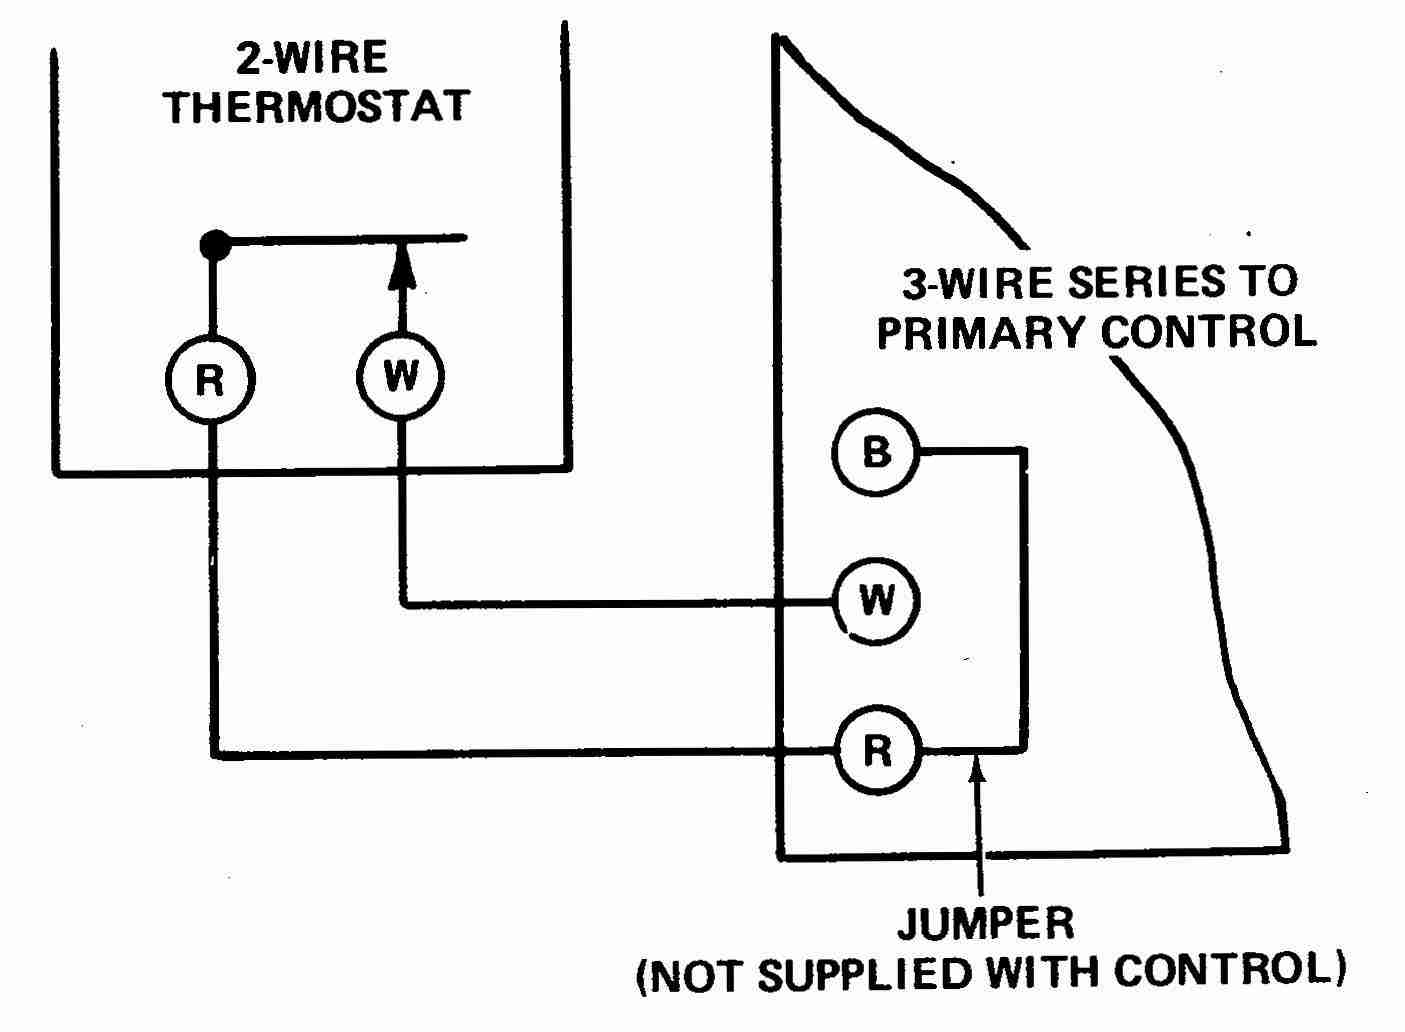 Heat Pump Thermostat Wiring Diagram Wiring Diagram For Heat Pump System Wiring Library